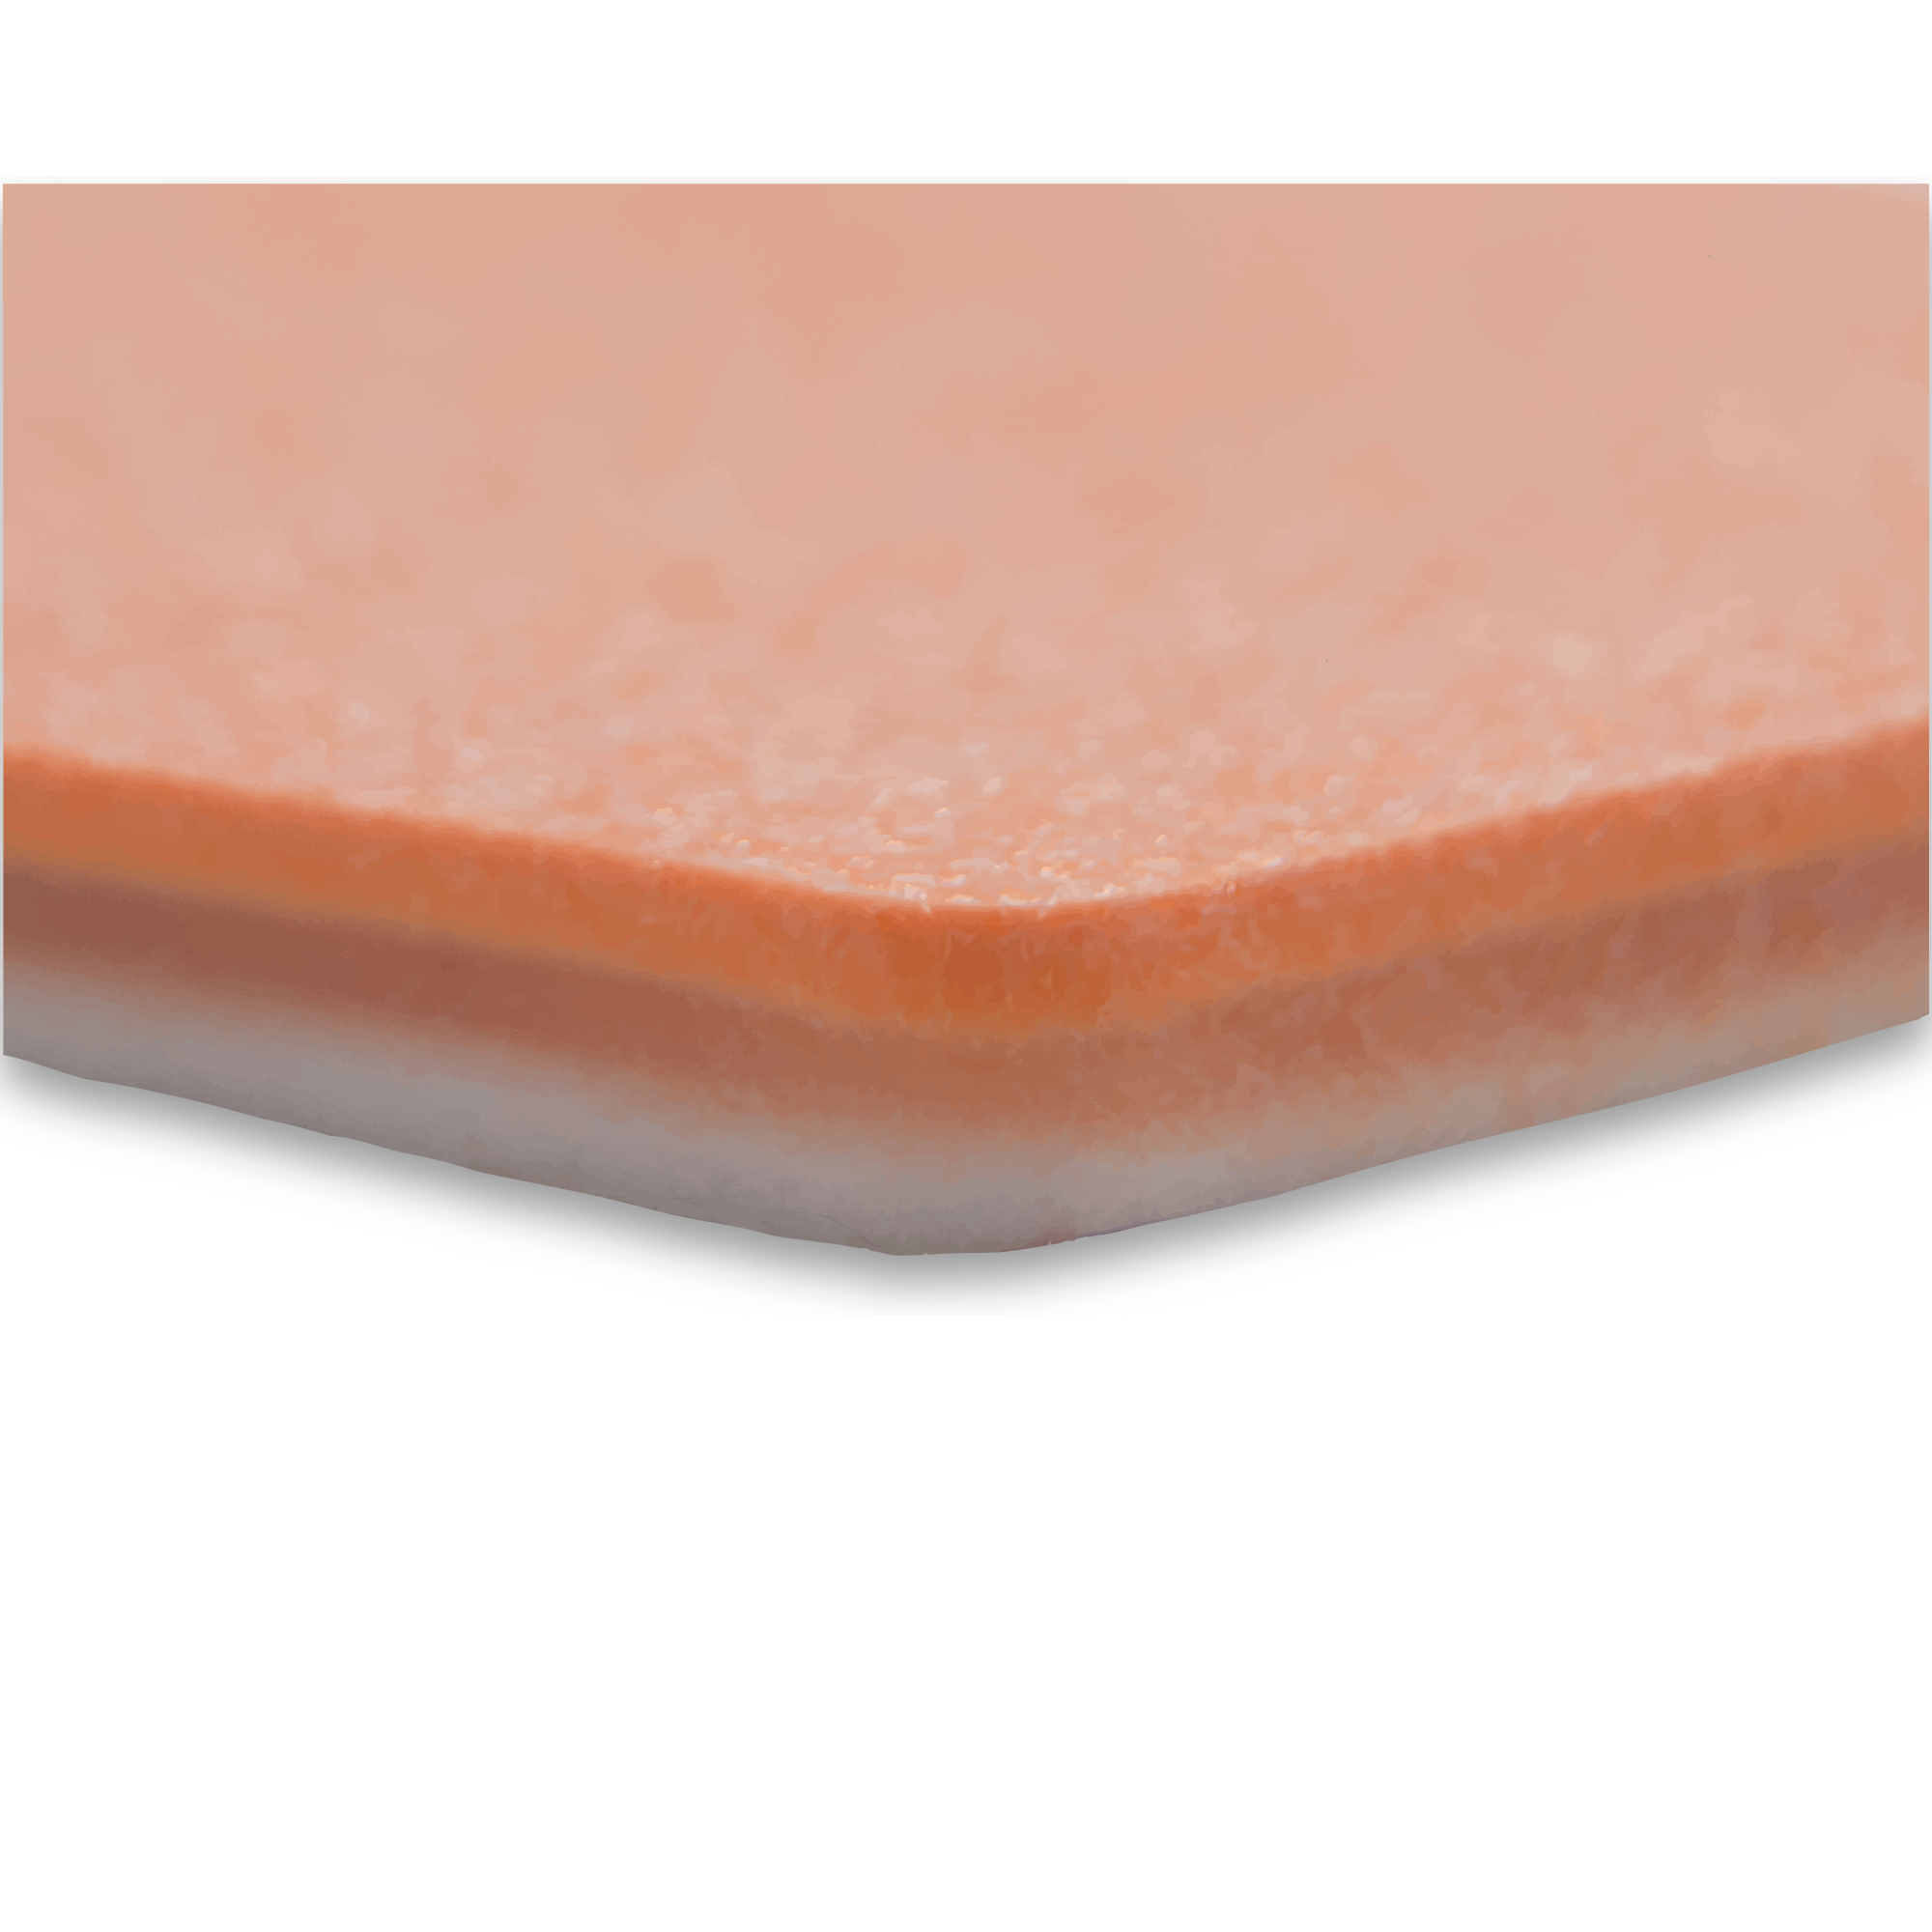 The 3-Layer Suture Pad from SurgiReal is designed to mimic the first three superficial layers of the abdominal wall; the Epidermis layer, Subcutaneous layer, and the first Fascia layer. 